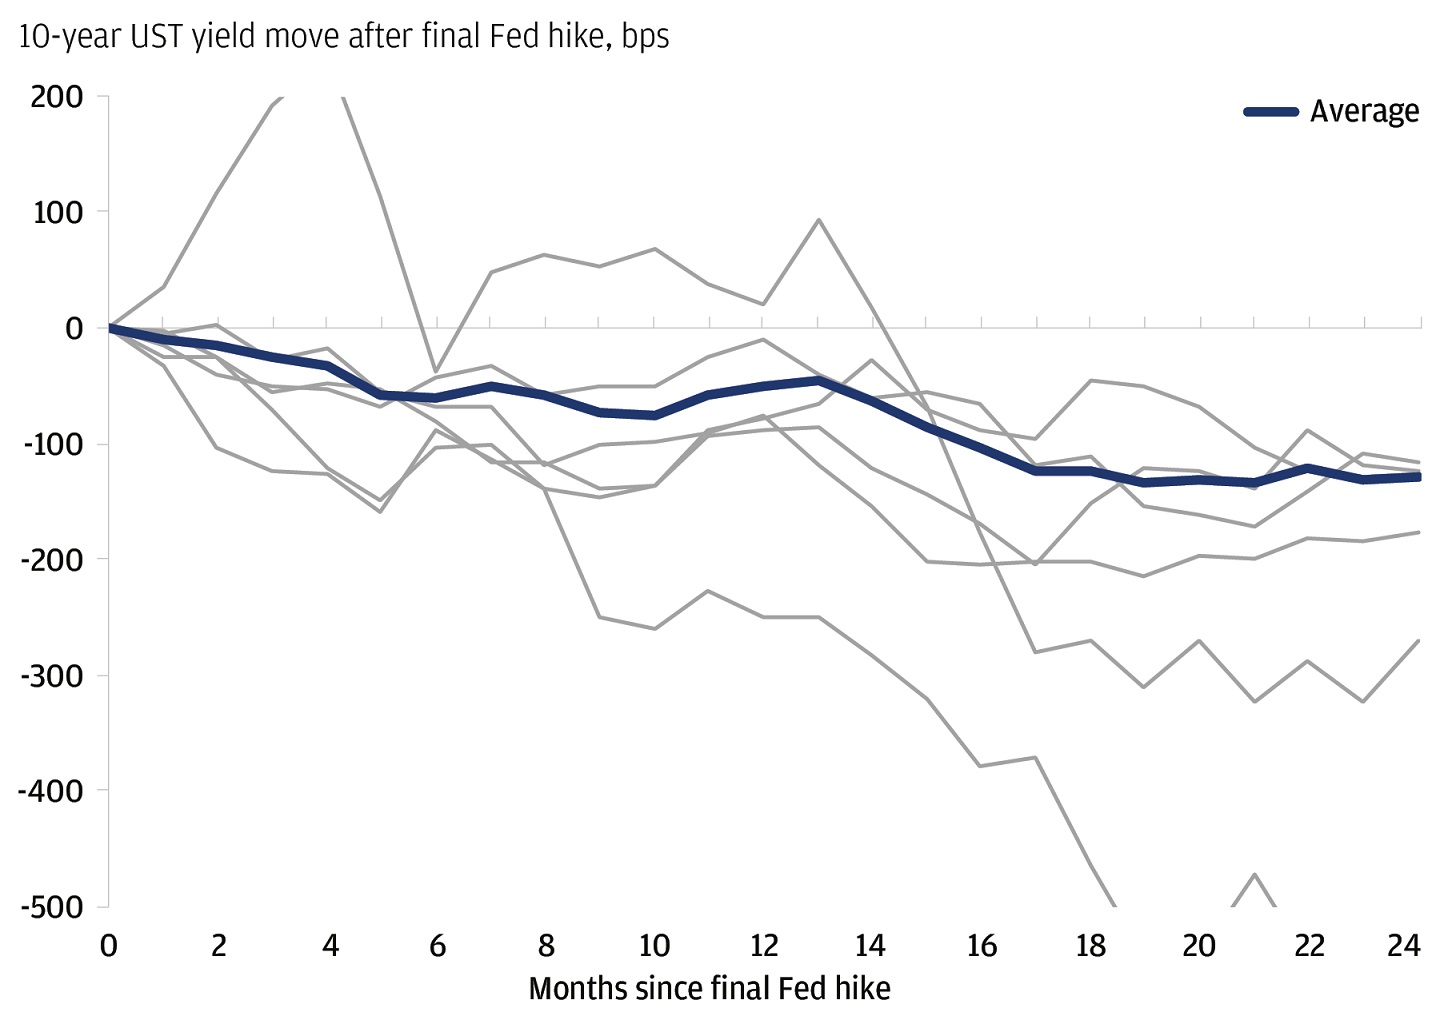 Line chart showing the trend for yields of 10-year UST in relation to the months since the last Fed hike.